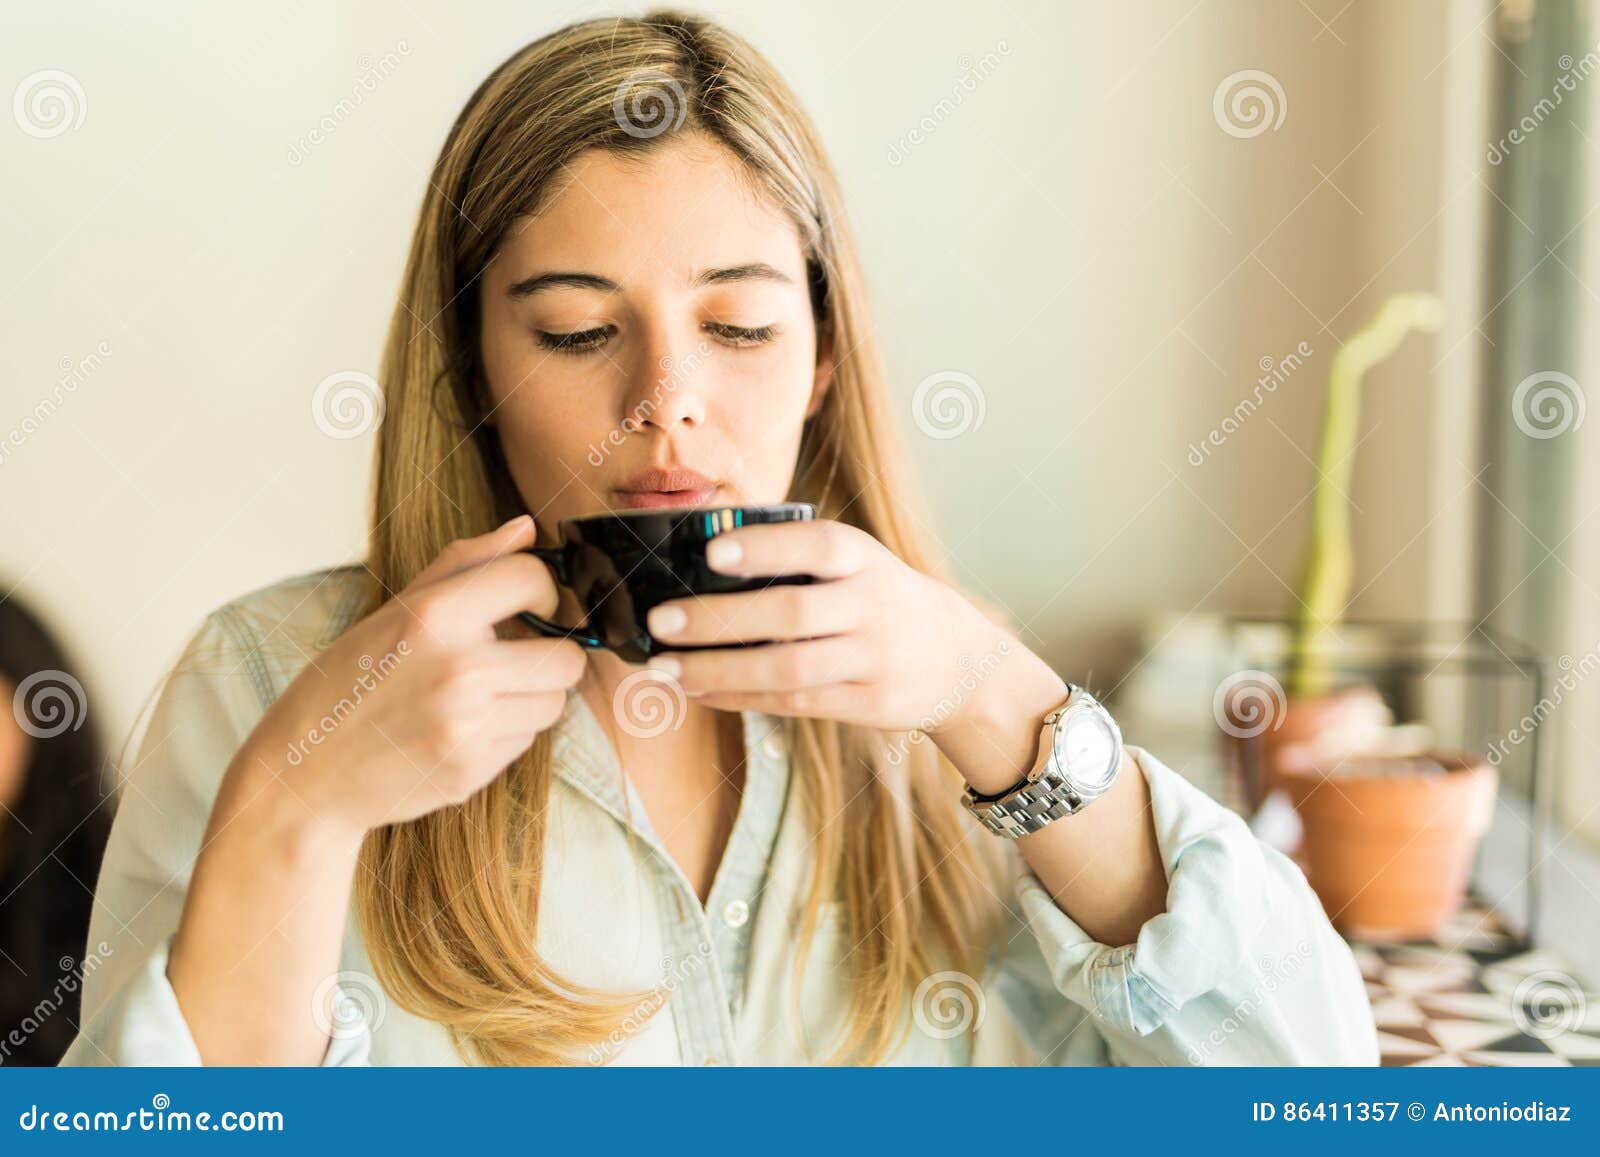 Woman Drinking Some Coffee Stock Image Image Of Copyspace 86411357